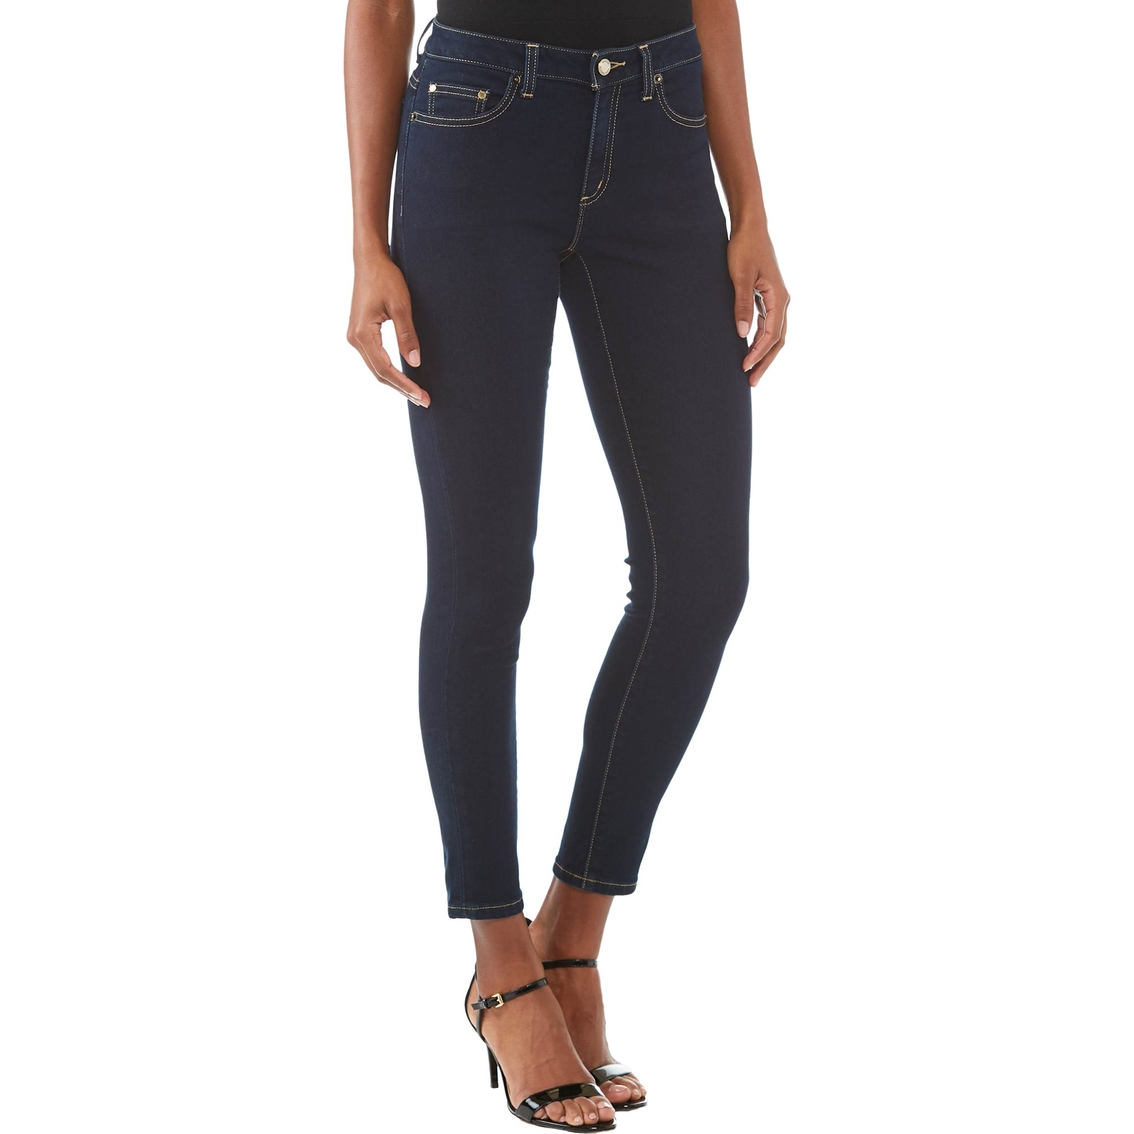 Michael Kors Stretch High Rise Skinny Jean | Jeans | Clothing ...